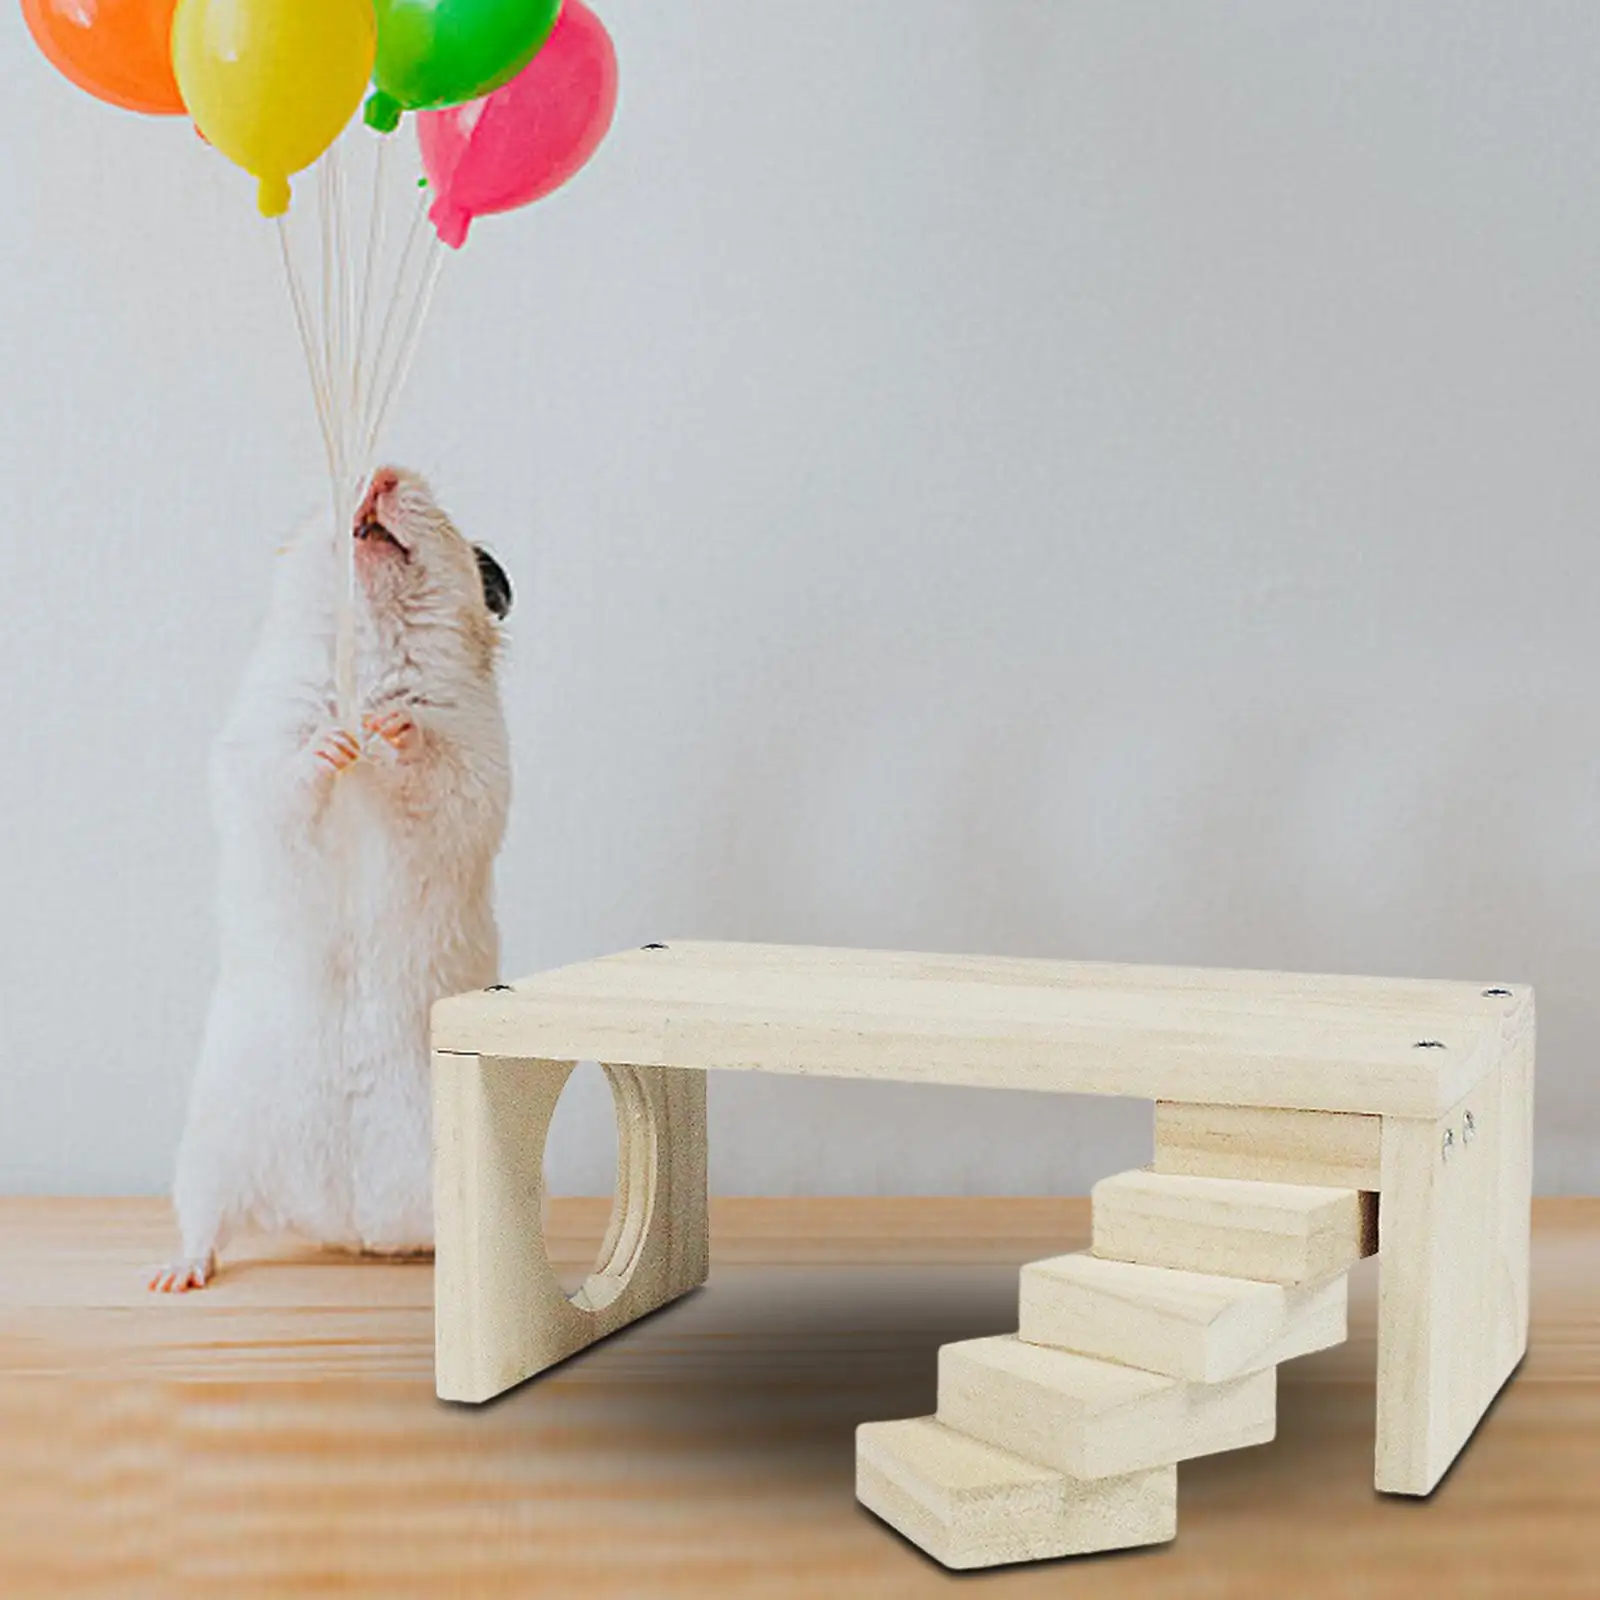 Hamster Climbing Toy Stairs Cage Playground Toys Landscaping Budgie Parakeet Climb Parrot Wooden Hamster Platform for Hamsters